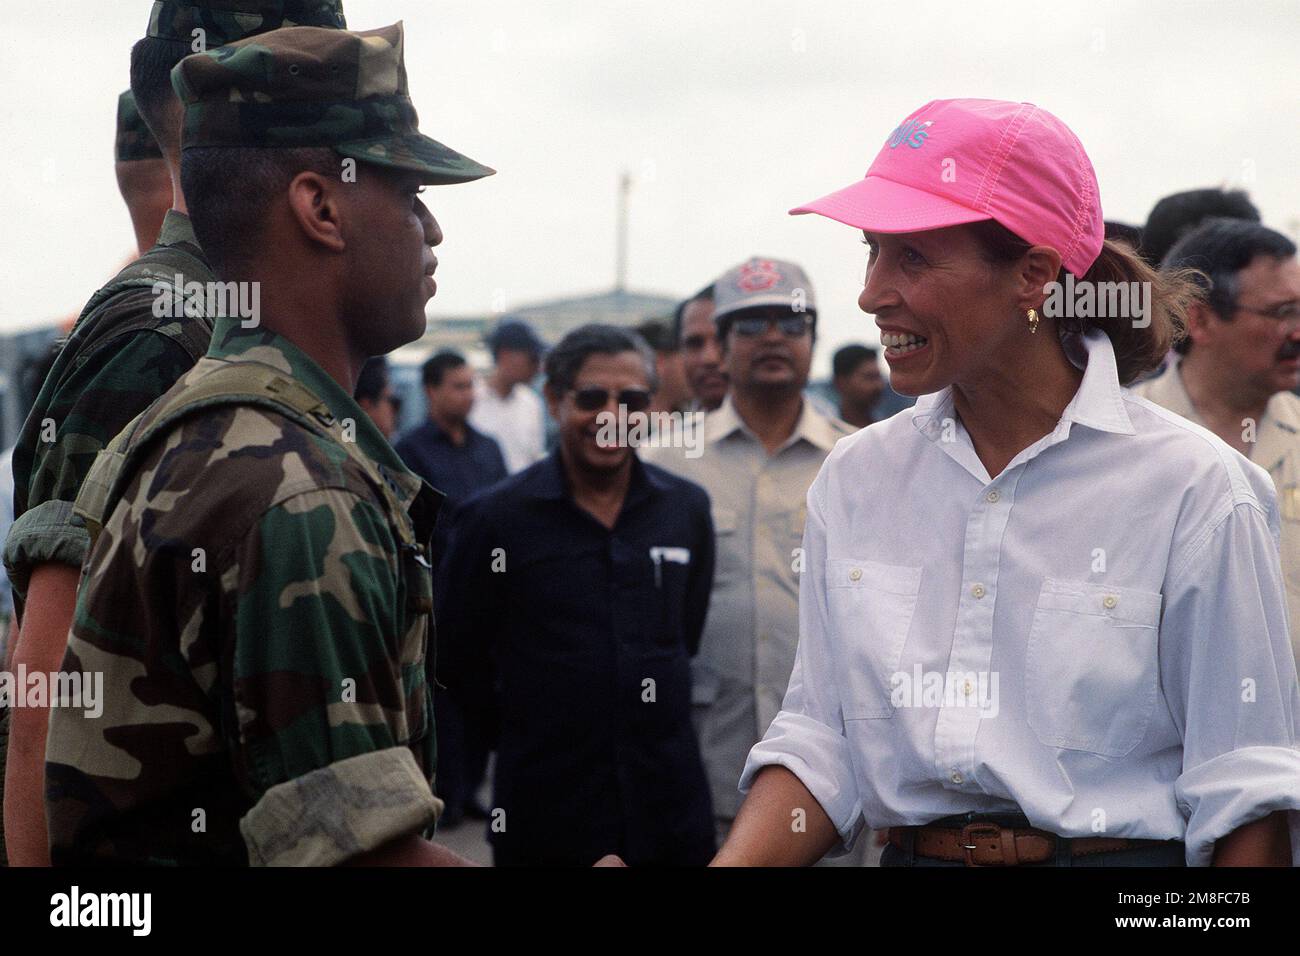 Marilyn Quayle, wife of Vice President Dan Quayle, greets Marines upon her arrival at Chittagong Airport. Mrs. Quayle is in Bangladesh to represent the United States as part of Operation Sea Angel, a U.S. military effort to provide disaster relief to victims of a cyclone which devastated the country on April 30th.. Subject Operation/Series: SEA ANGEL Country: Bangladesh(BGD) Stock Photo